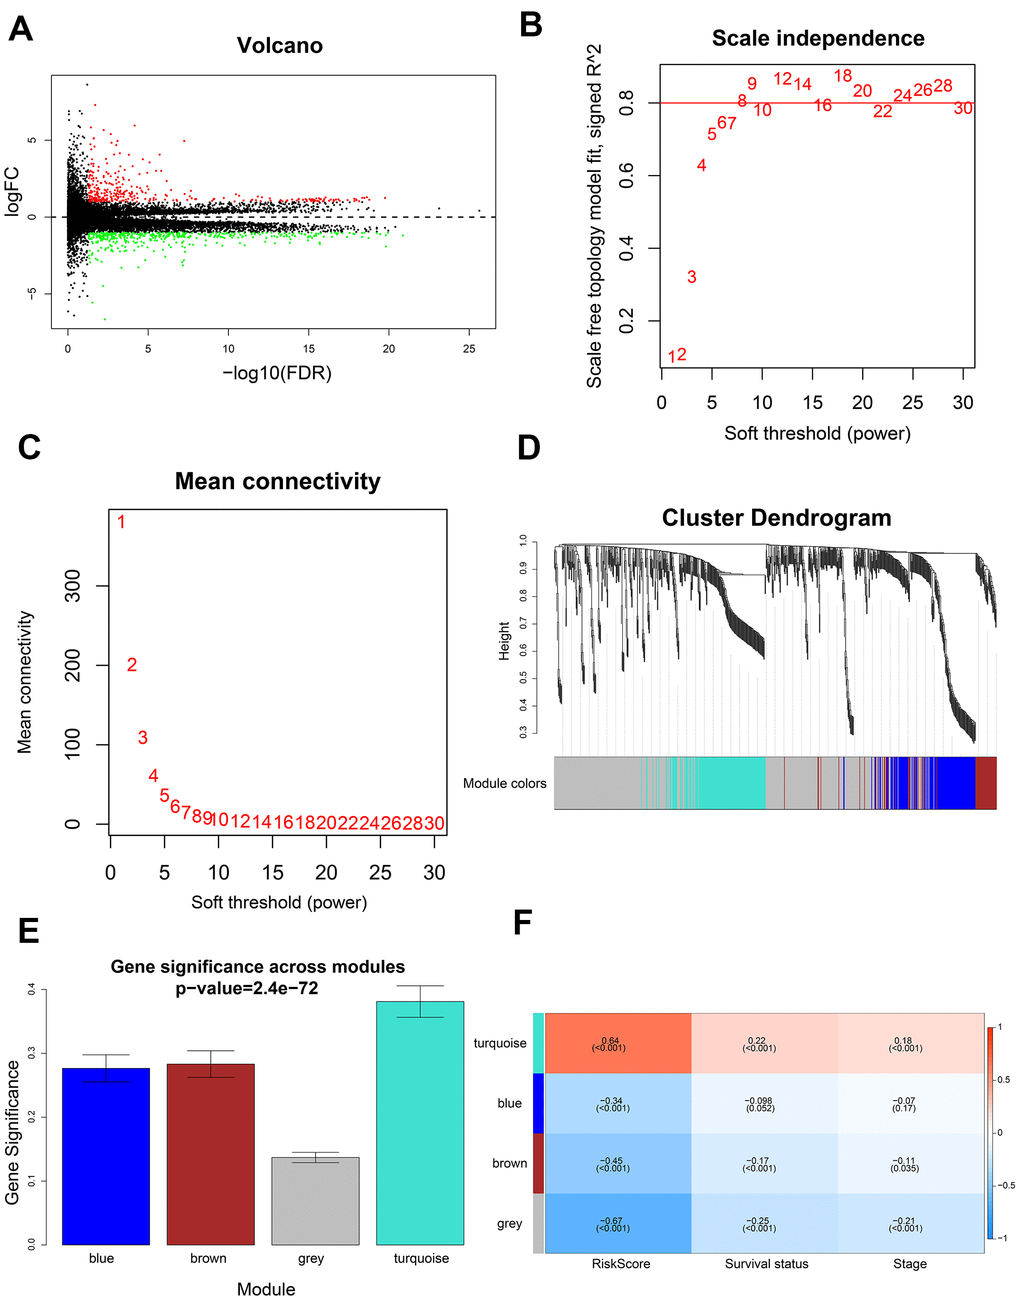 Identification of gene modules using WGCNA. (A) Volcano plot shows 741 differentially expressed genes or DEGs (335 up-regulated and 406 down-regulated) in 199 high-risk and 199 low-risk LADC patient groups. (B) Analysis of scale-free topology fit index for various soft threshold powers (β). (C) Analysis of mean connectivity for various soft threshold powers. (D) Dendrogram of all differentially expressed genes clustered into various gene modules on the basis of a topological overlap-derived dissimilarity measure. The modules are displayed with different colors in the horizontal bar below the dendrogram. (E) Distribution of gene significance values in different modules. (F) The module-trait relationship heat map shows the correlation between module eigengenes (MEs) and clinicopathological characteristics. The correlation coefficients and p values are shown in the column for each ME and the corresponding clinicopathological characteristic.